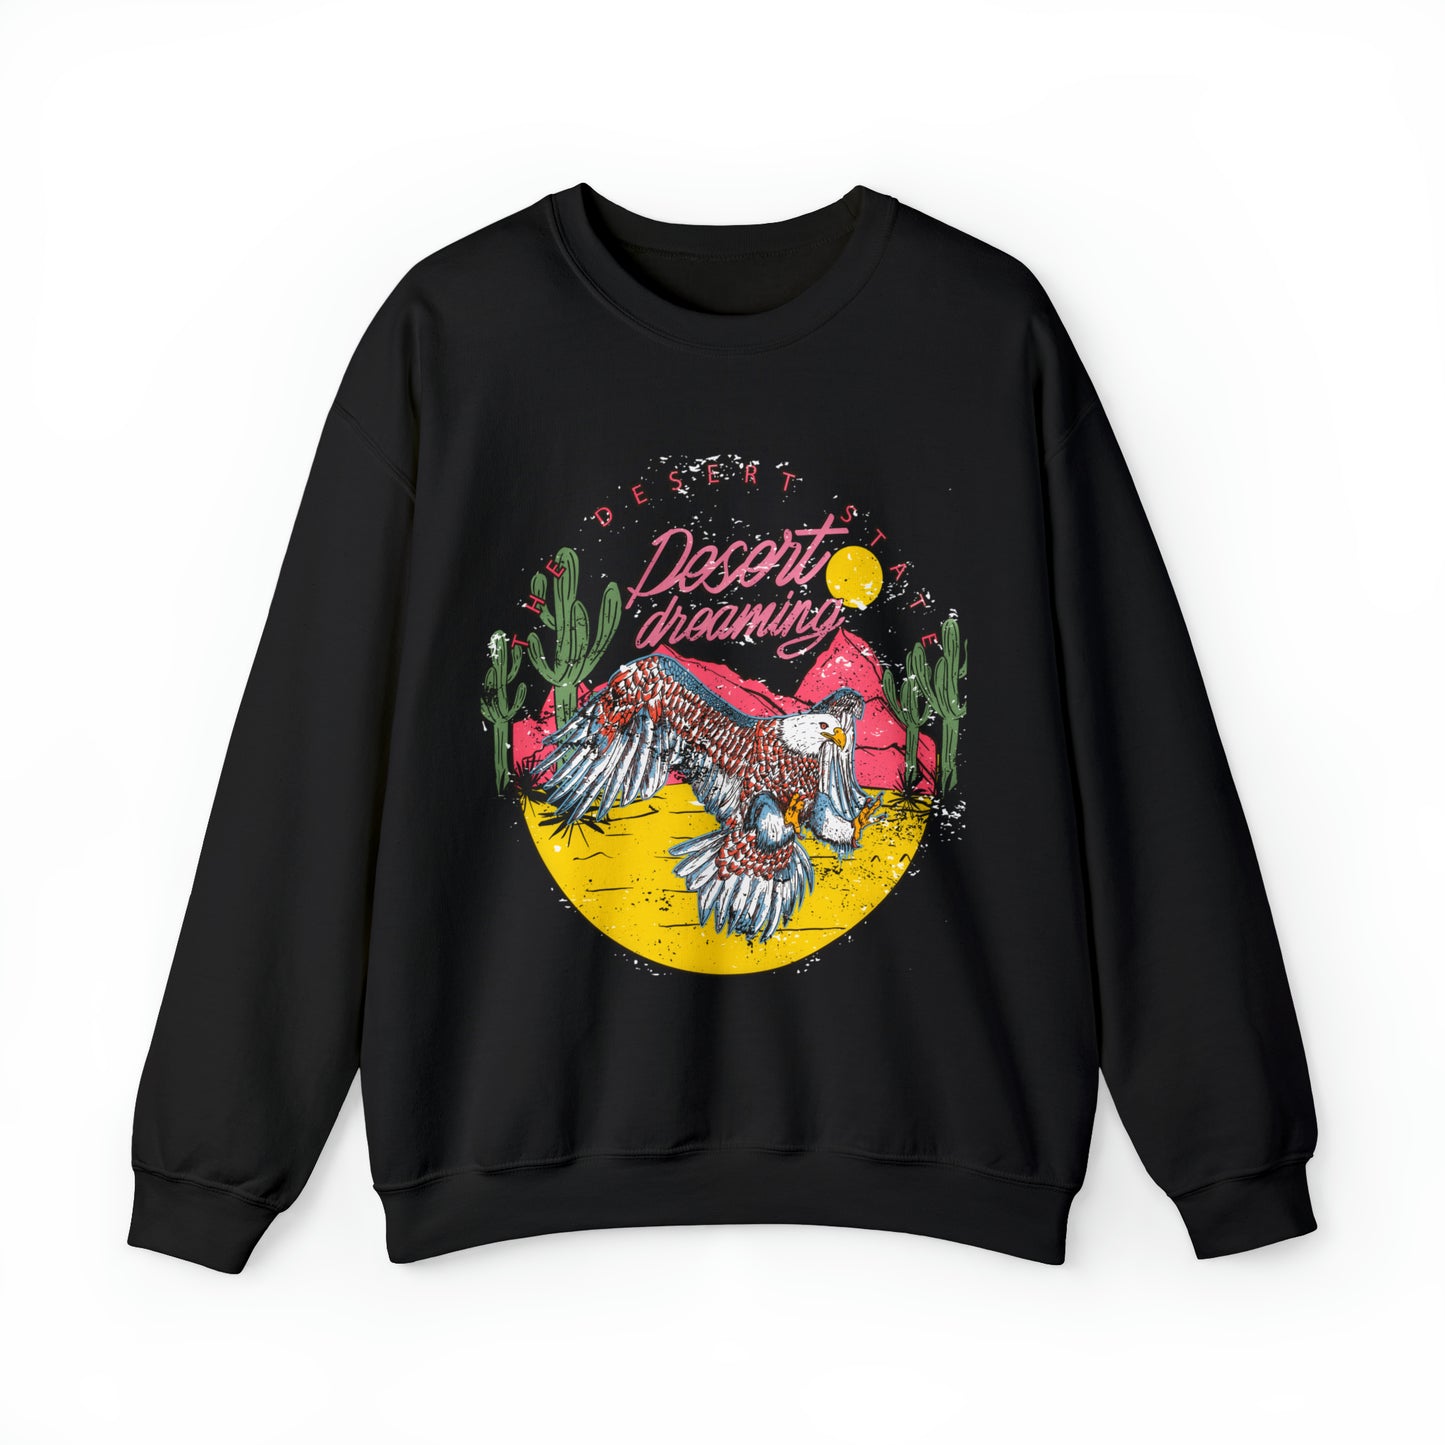 The Desert State of Dreaming // CREWNECK